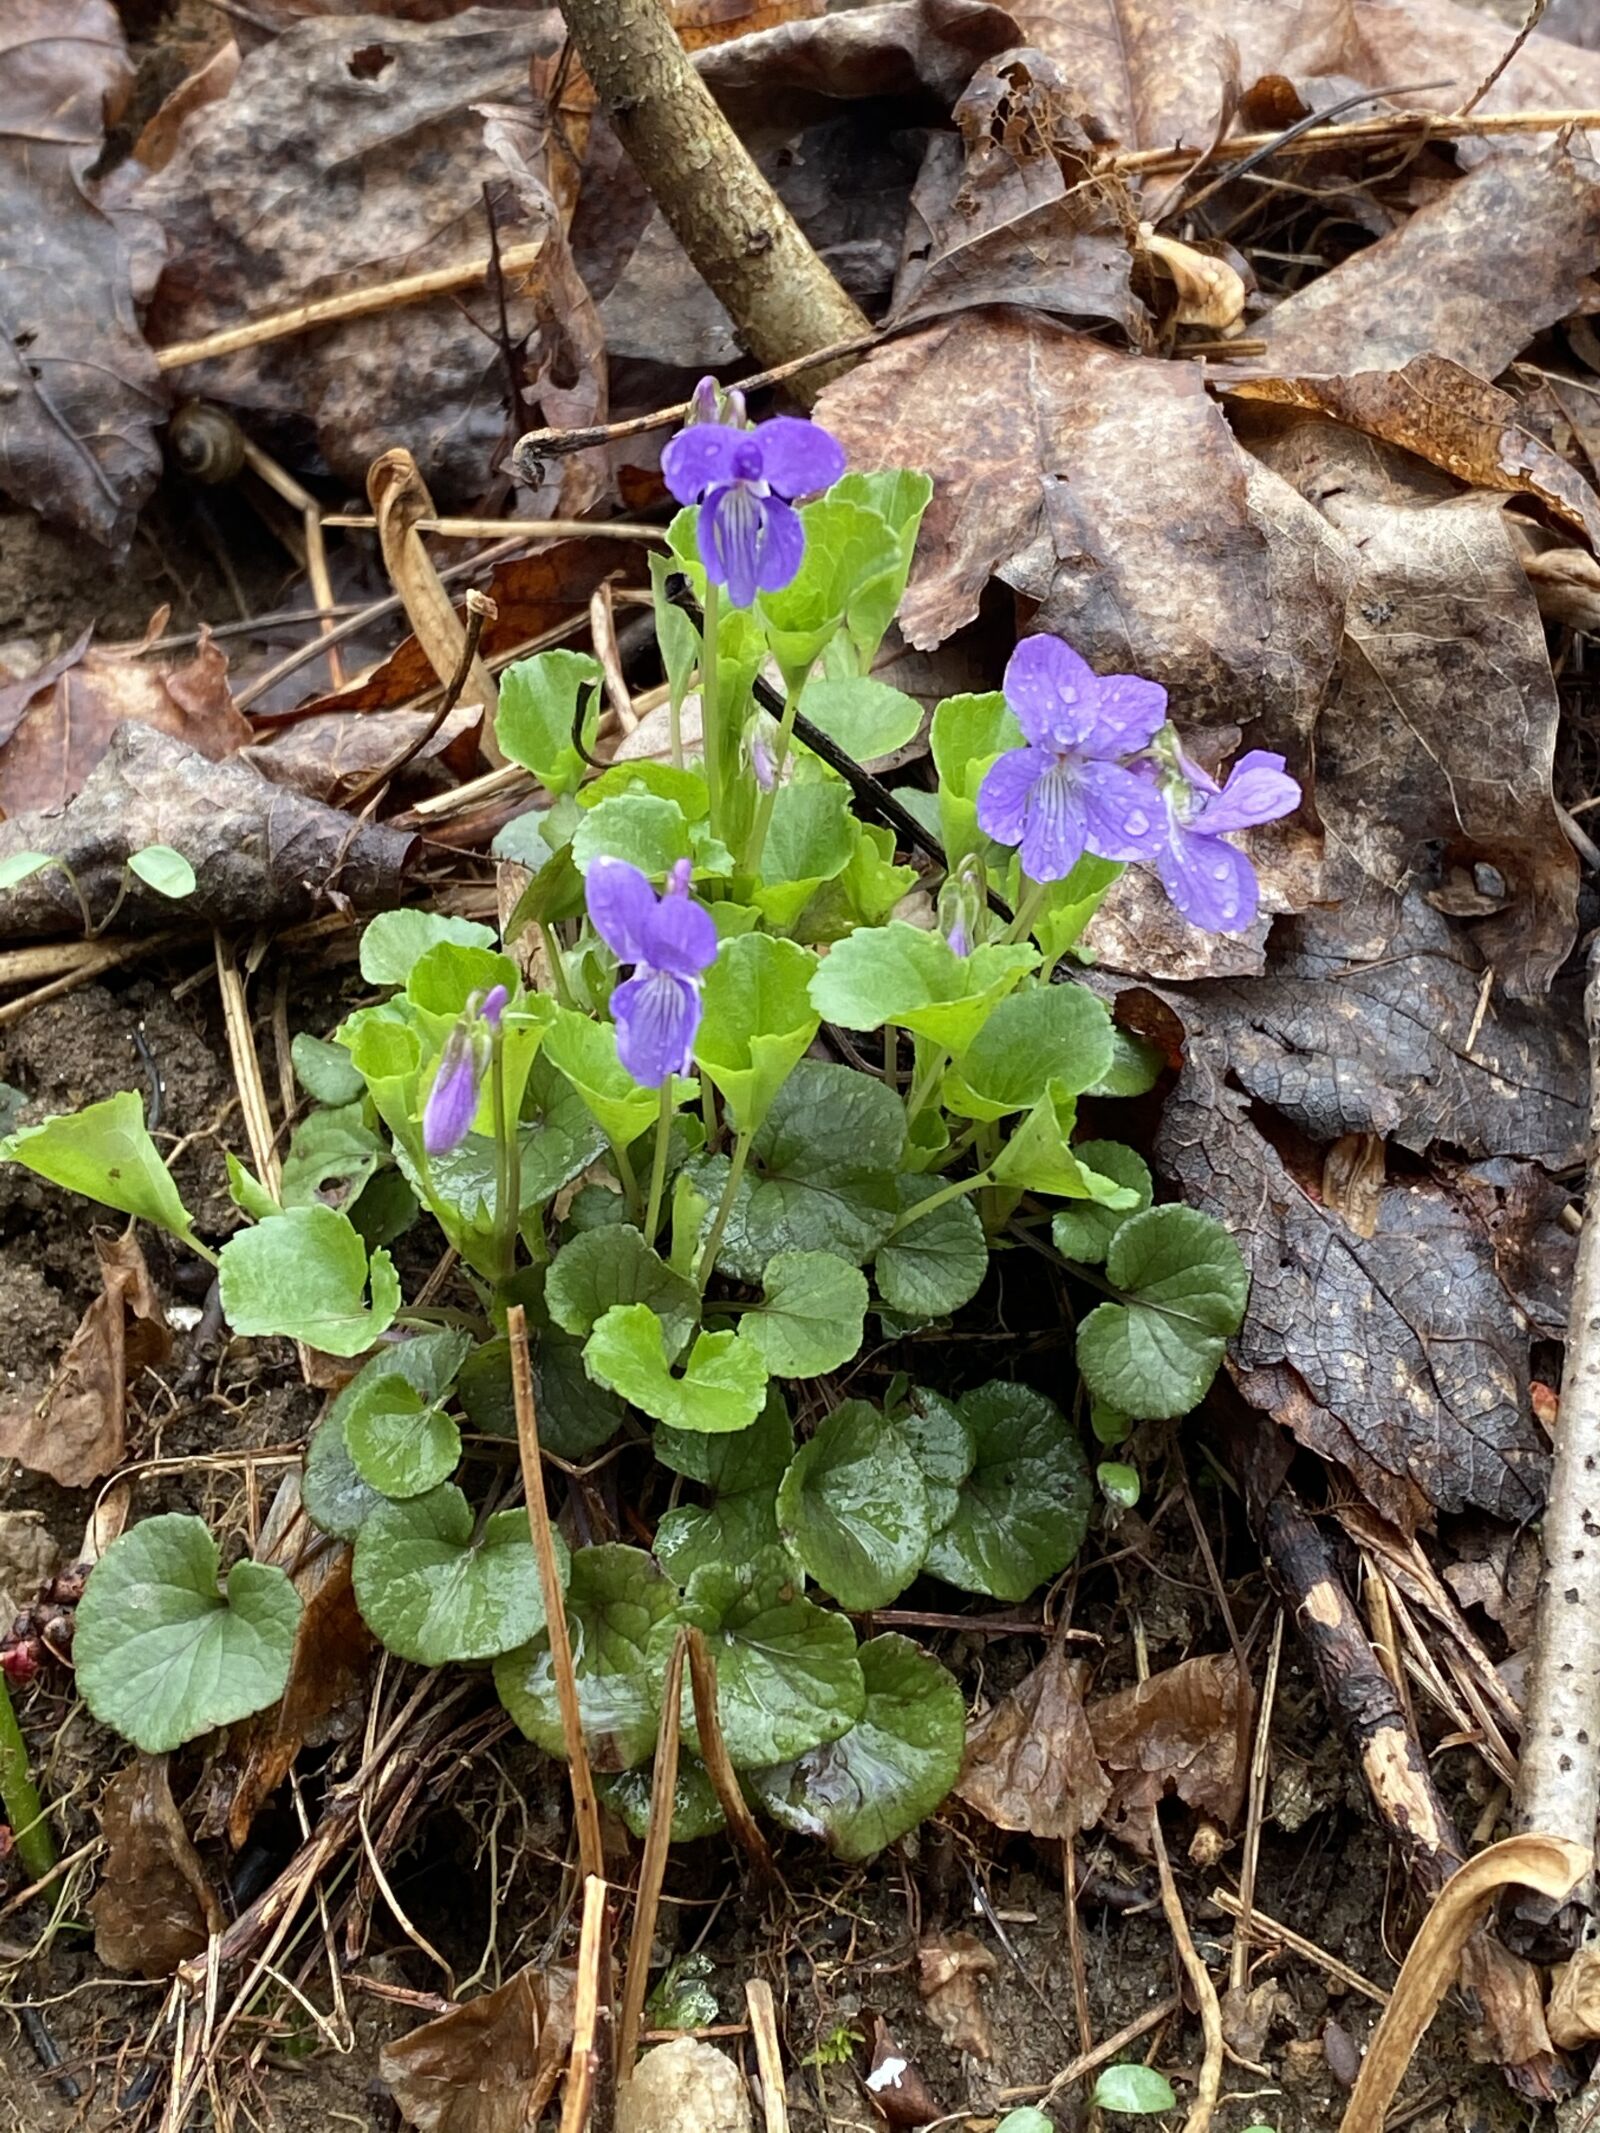 iPhone 11 Pro Max back triple camera 4.25mm f/1.8 sample photo. Violets, nature, purple photography